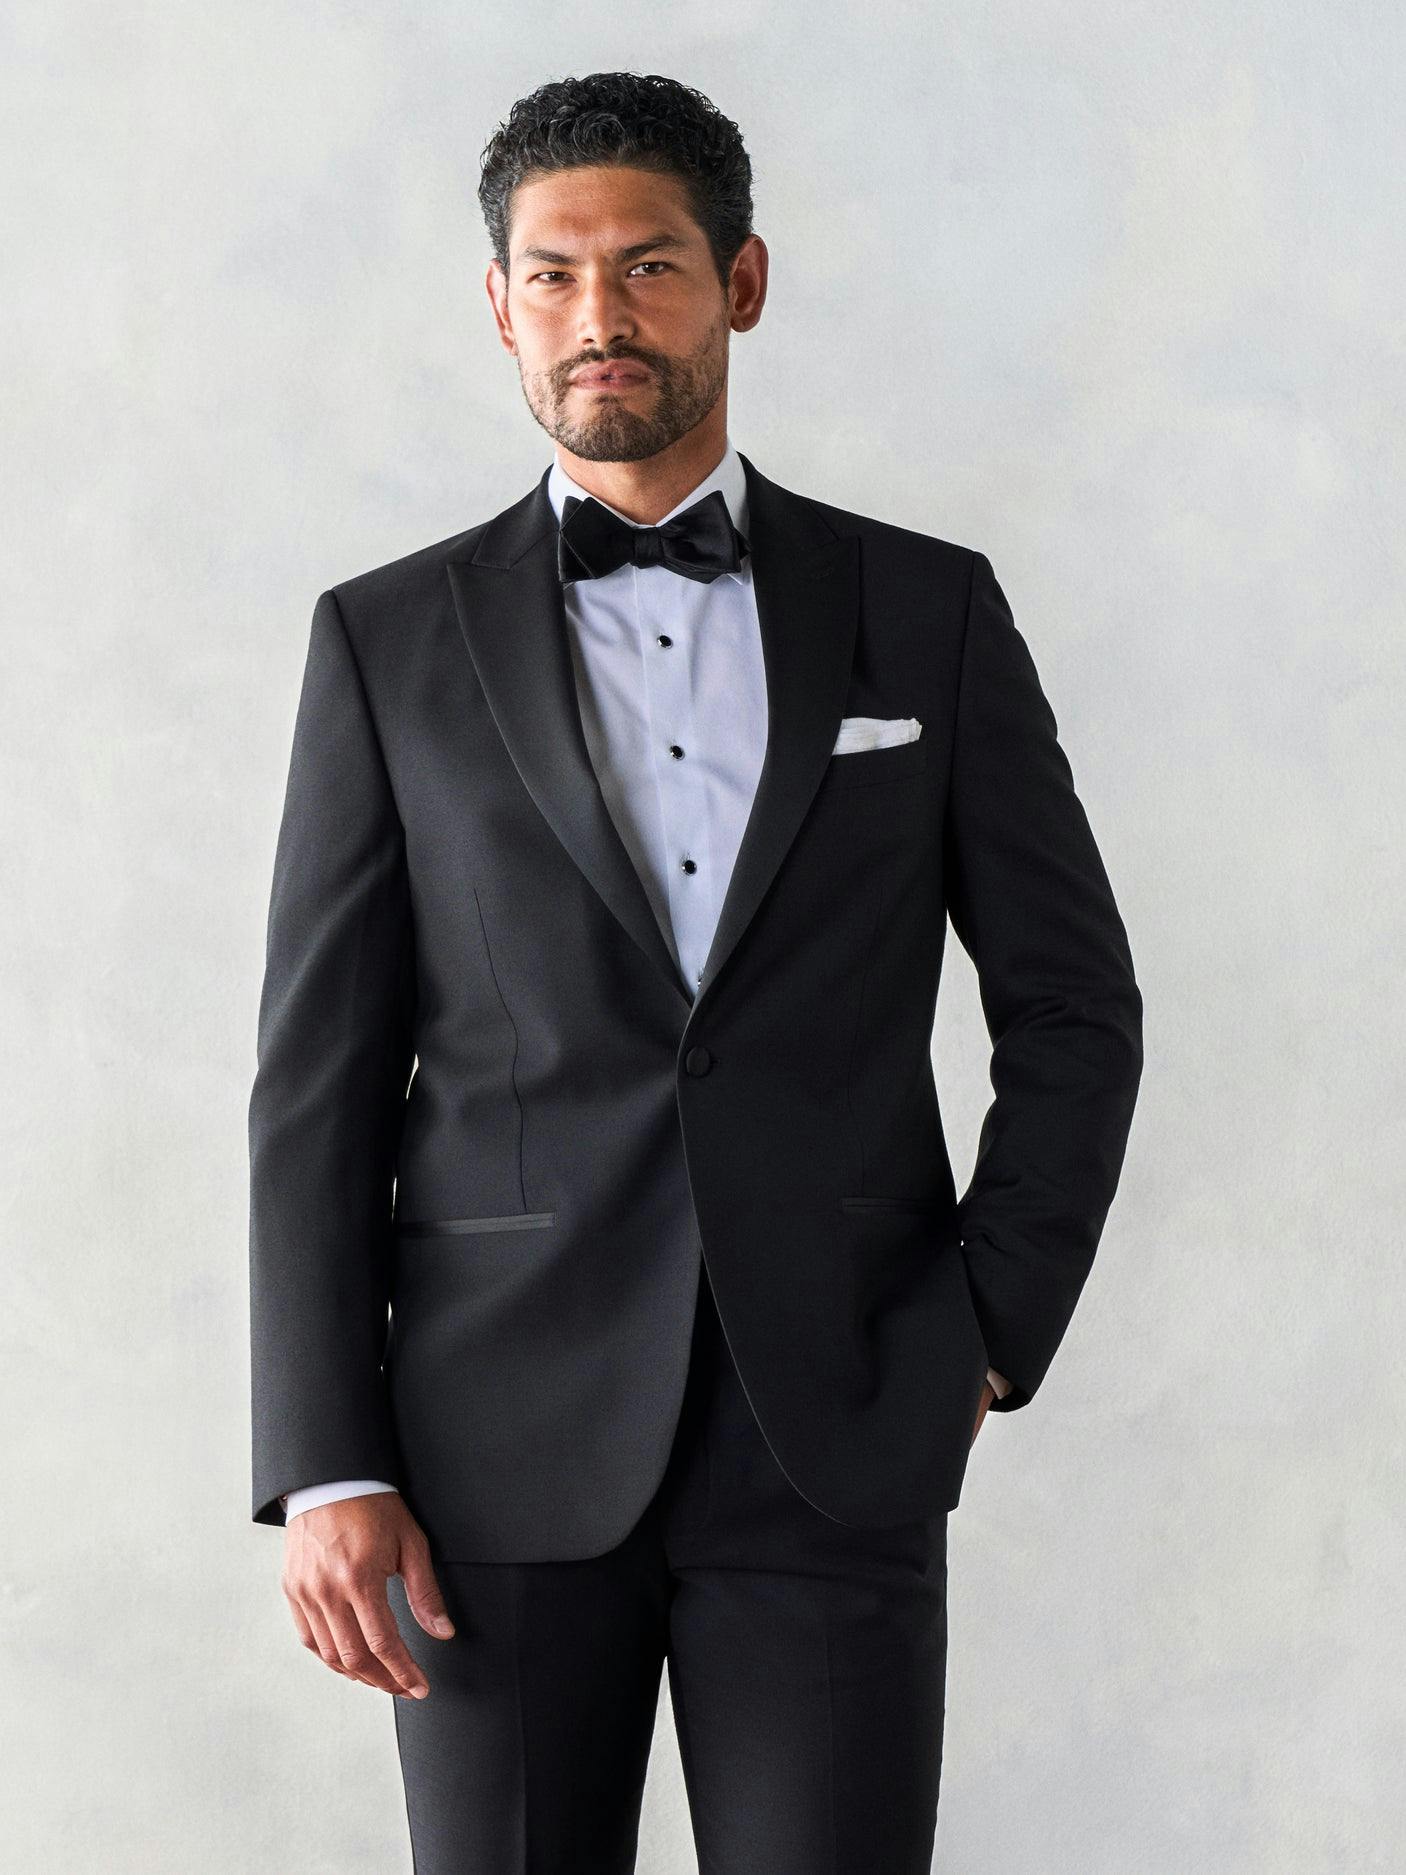 This is peak formalwear style, literally. It's tough to beat the classic yet statement-making look of a peak lapel tuxedo plus, the upward-pointing lapels frame your face and elongate your frame. Win, win.

Includes jacket and pants. Pants are available in classic and slim fits.